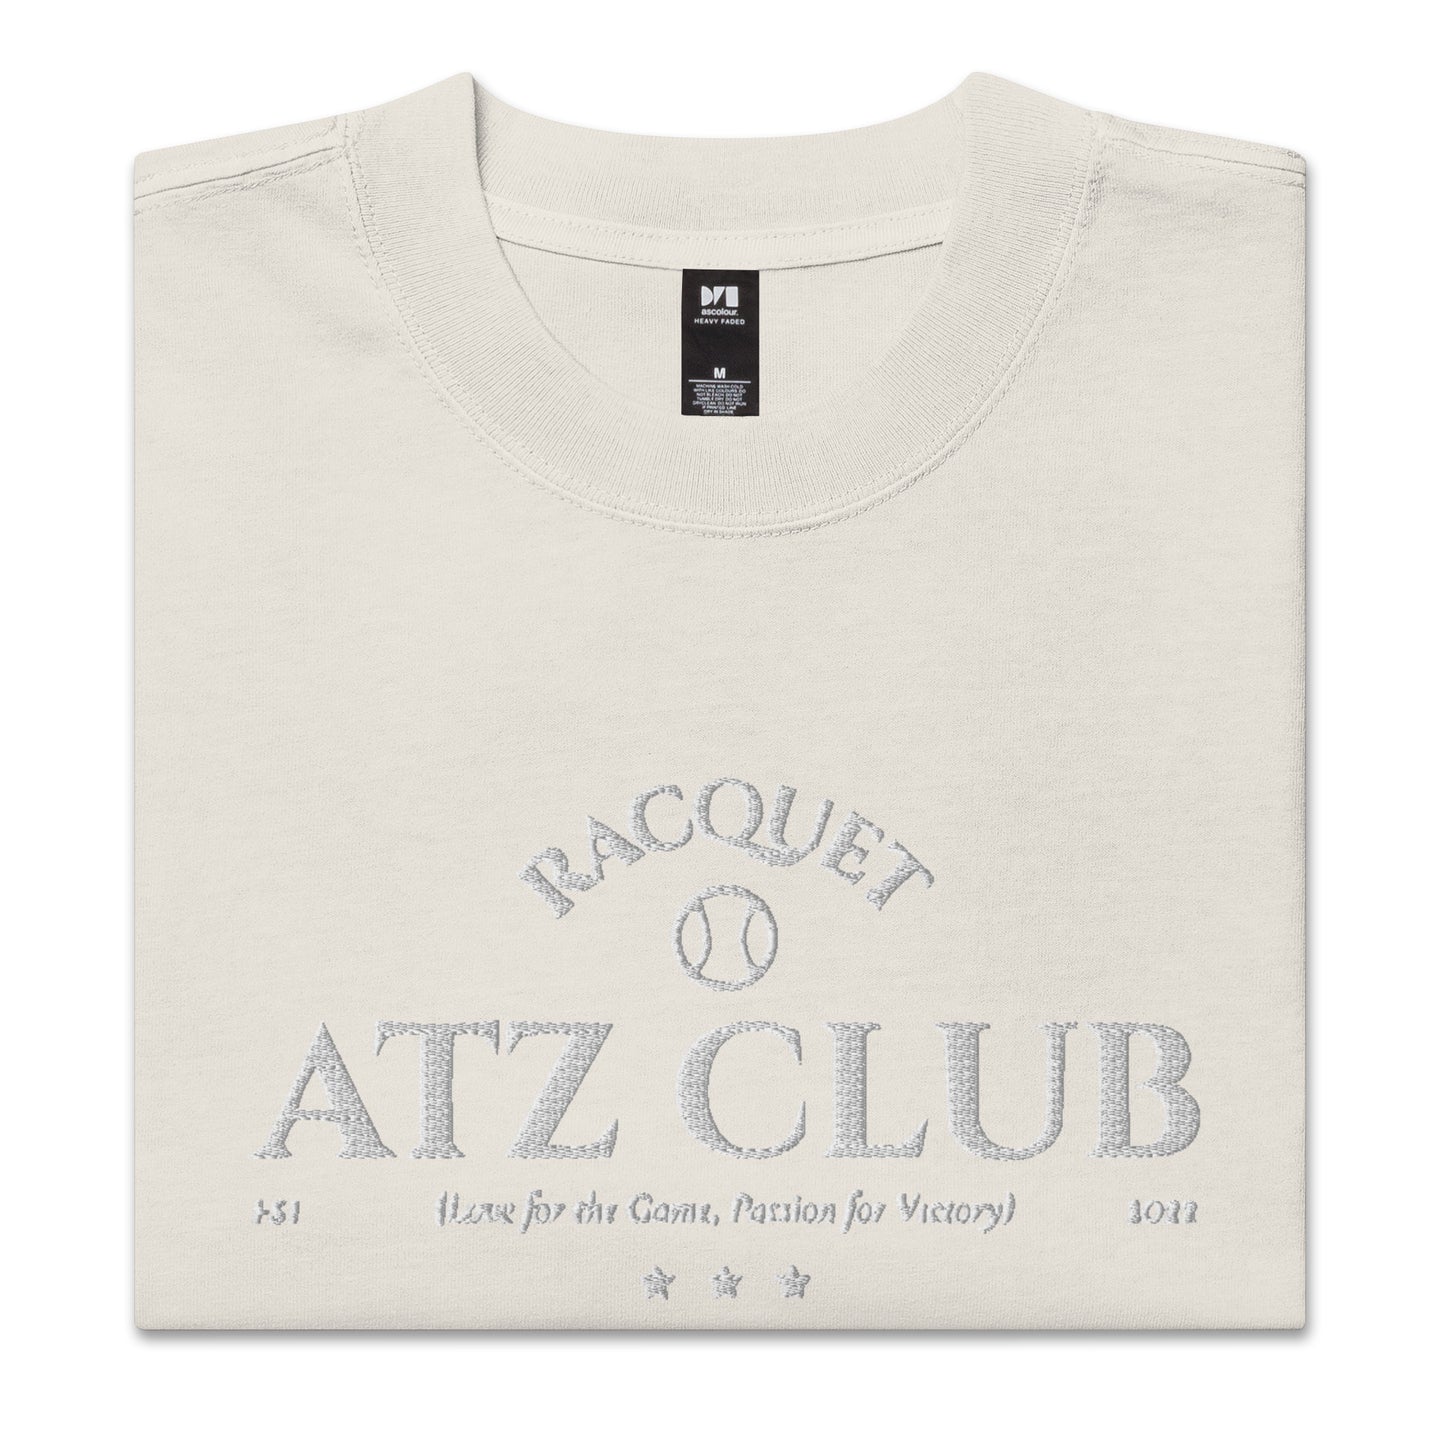 Atziluth Gallery "Country Club" Oversized faded t-shirt